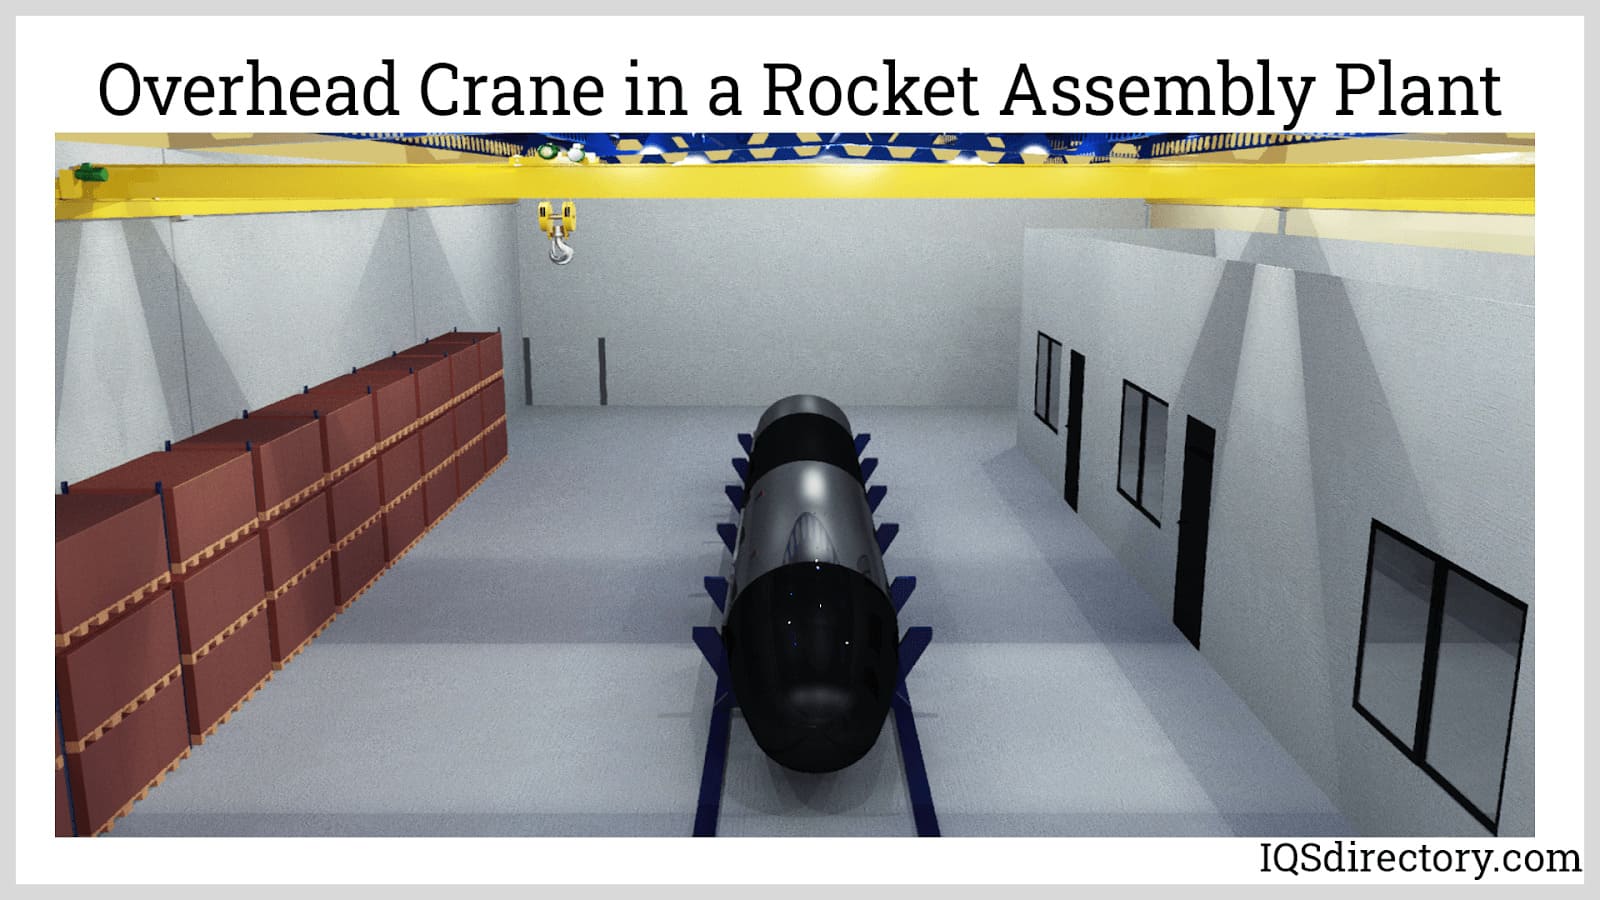 Overhead Crane in a Rocket Assembly Plant